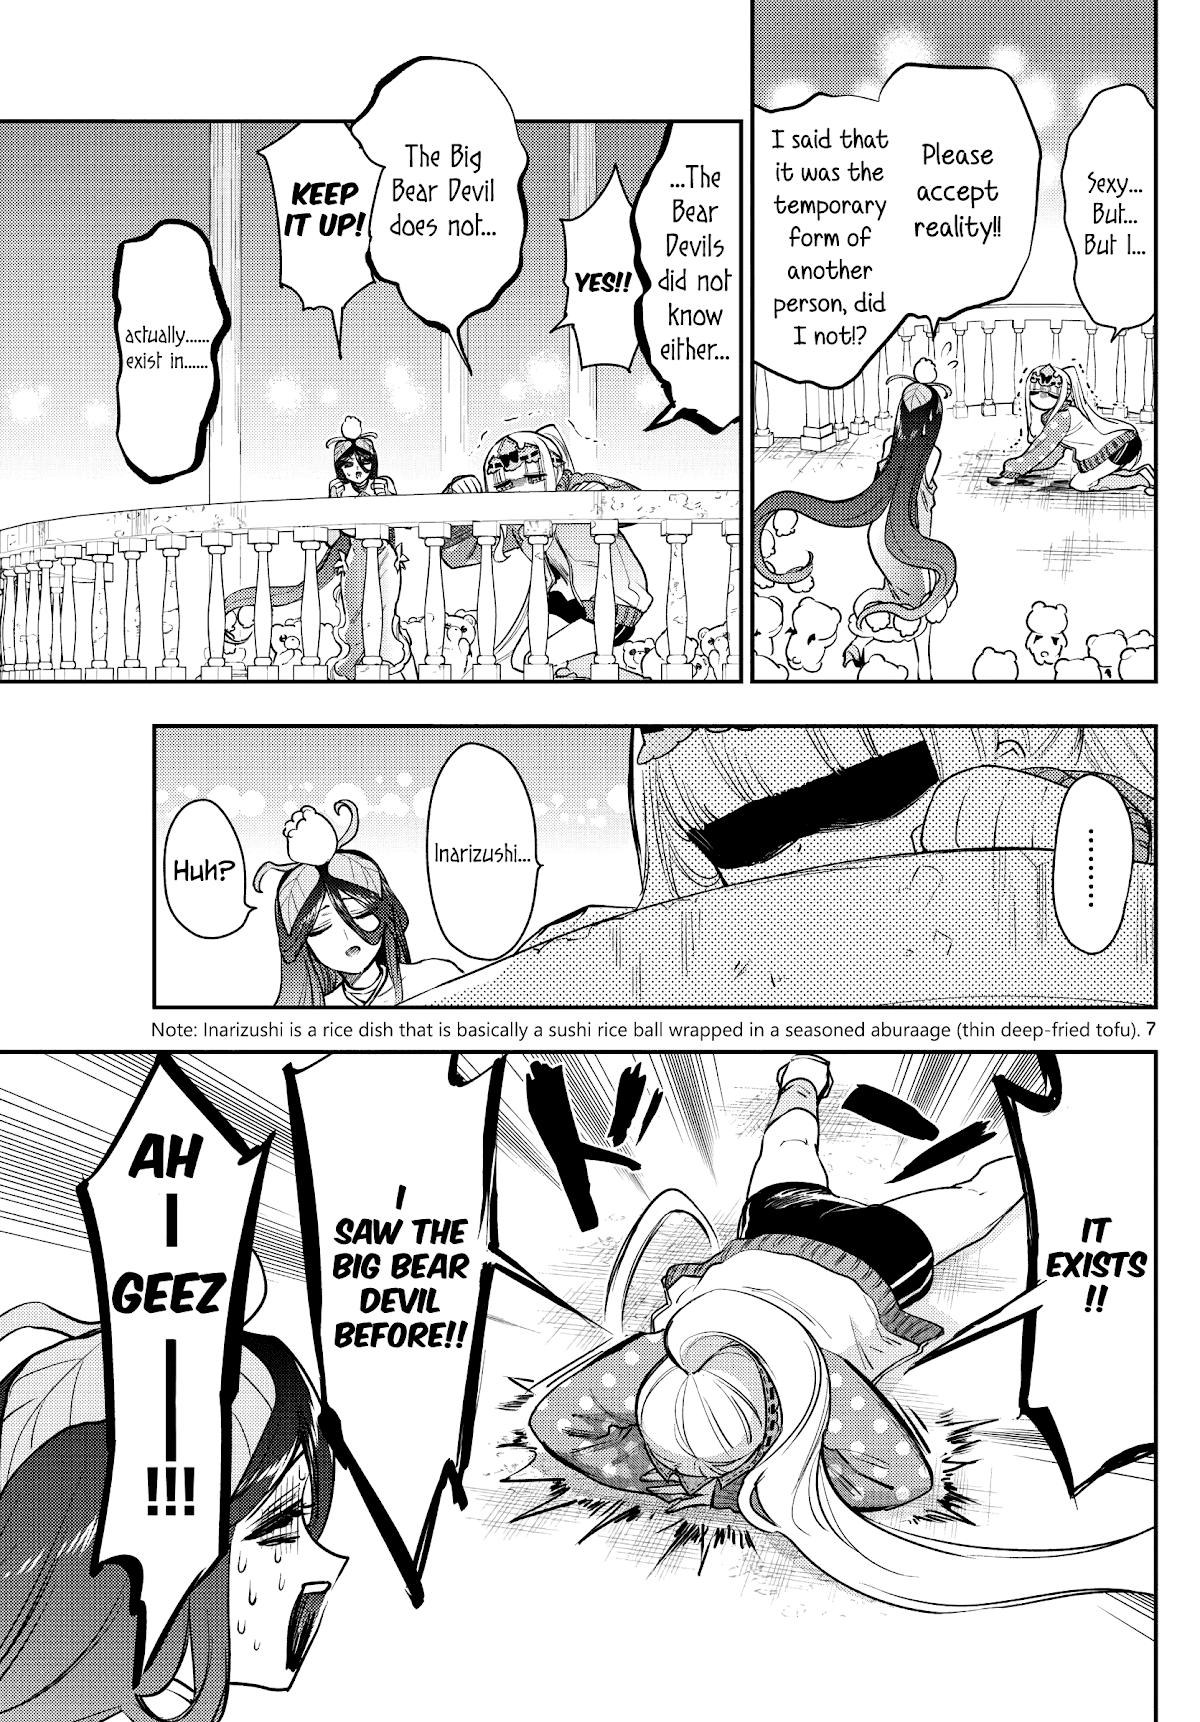 Maou-Jou De Oyasumi Chapter 262: Does That Mean There Is A Big Bear Devil? page 7 - Mangakakalot